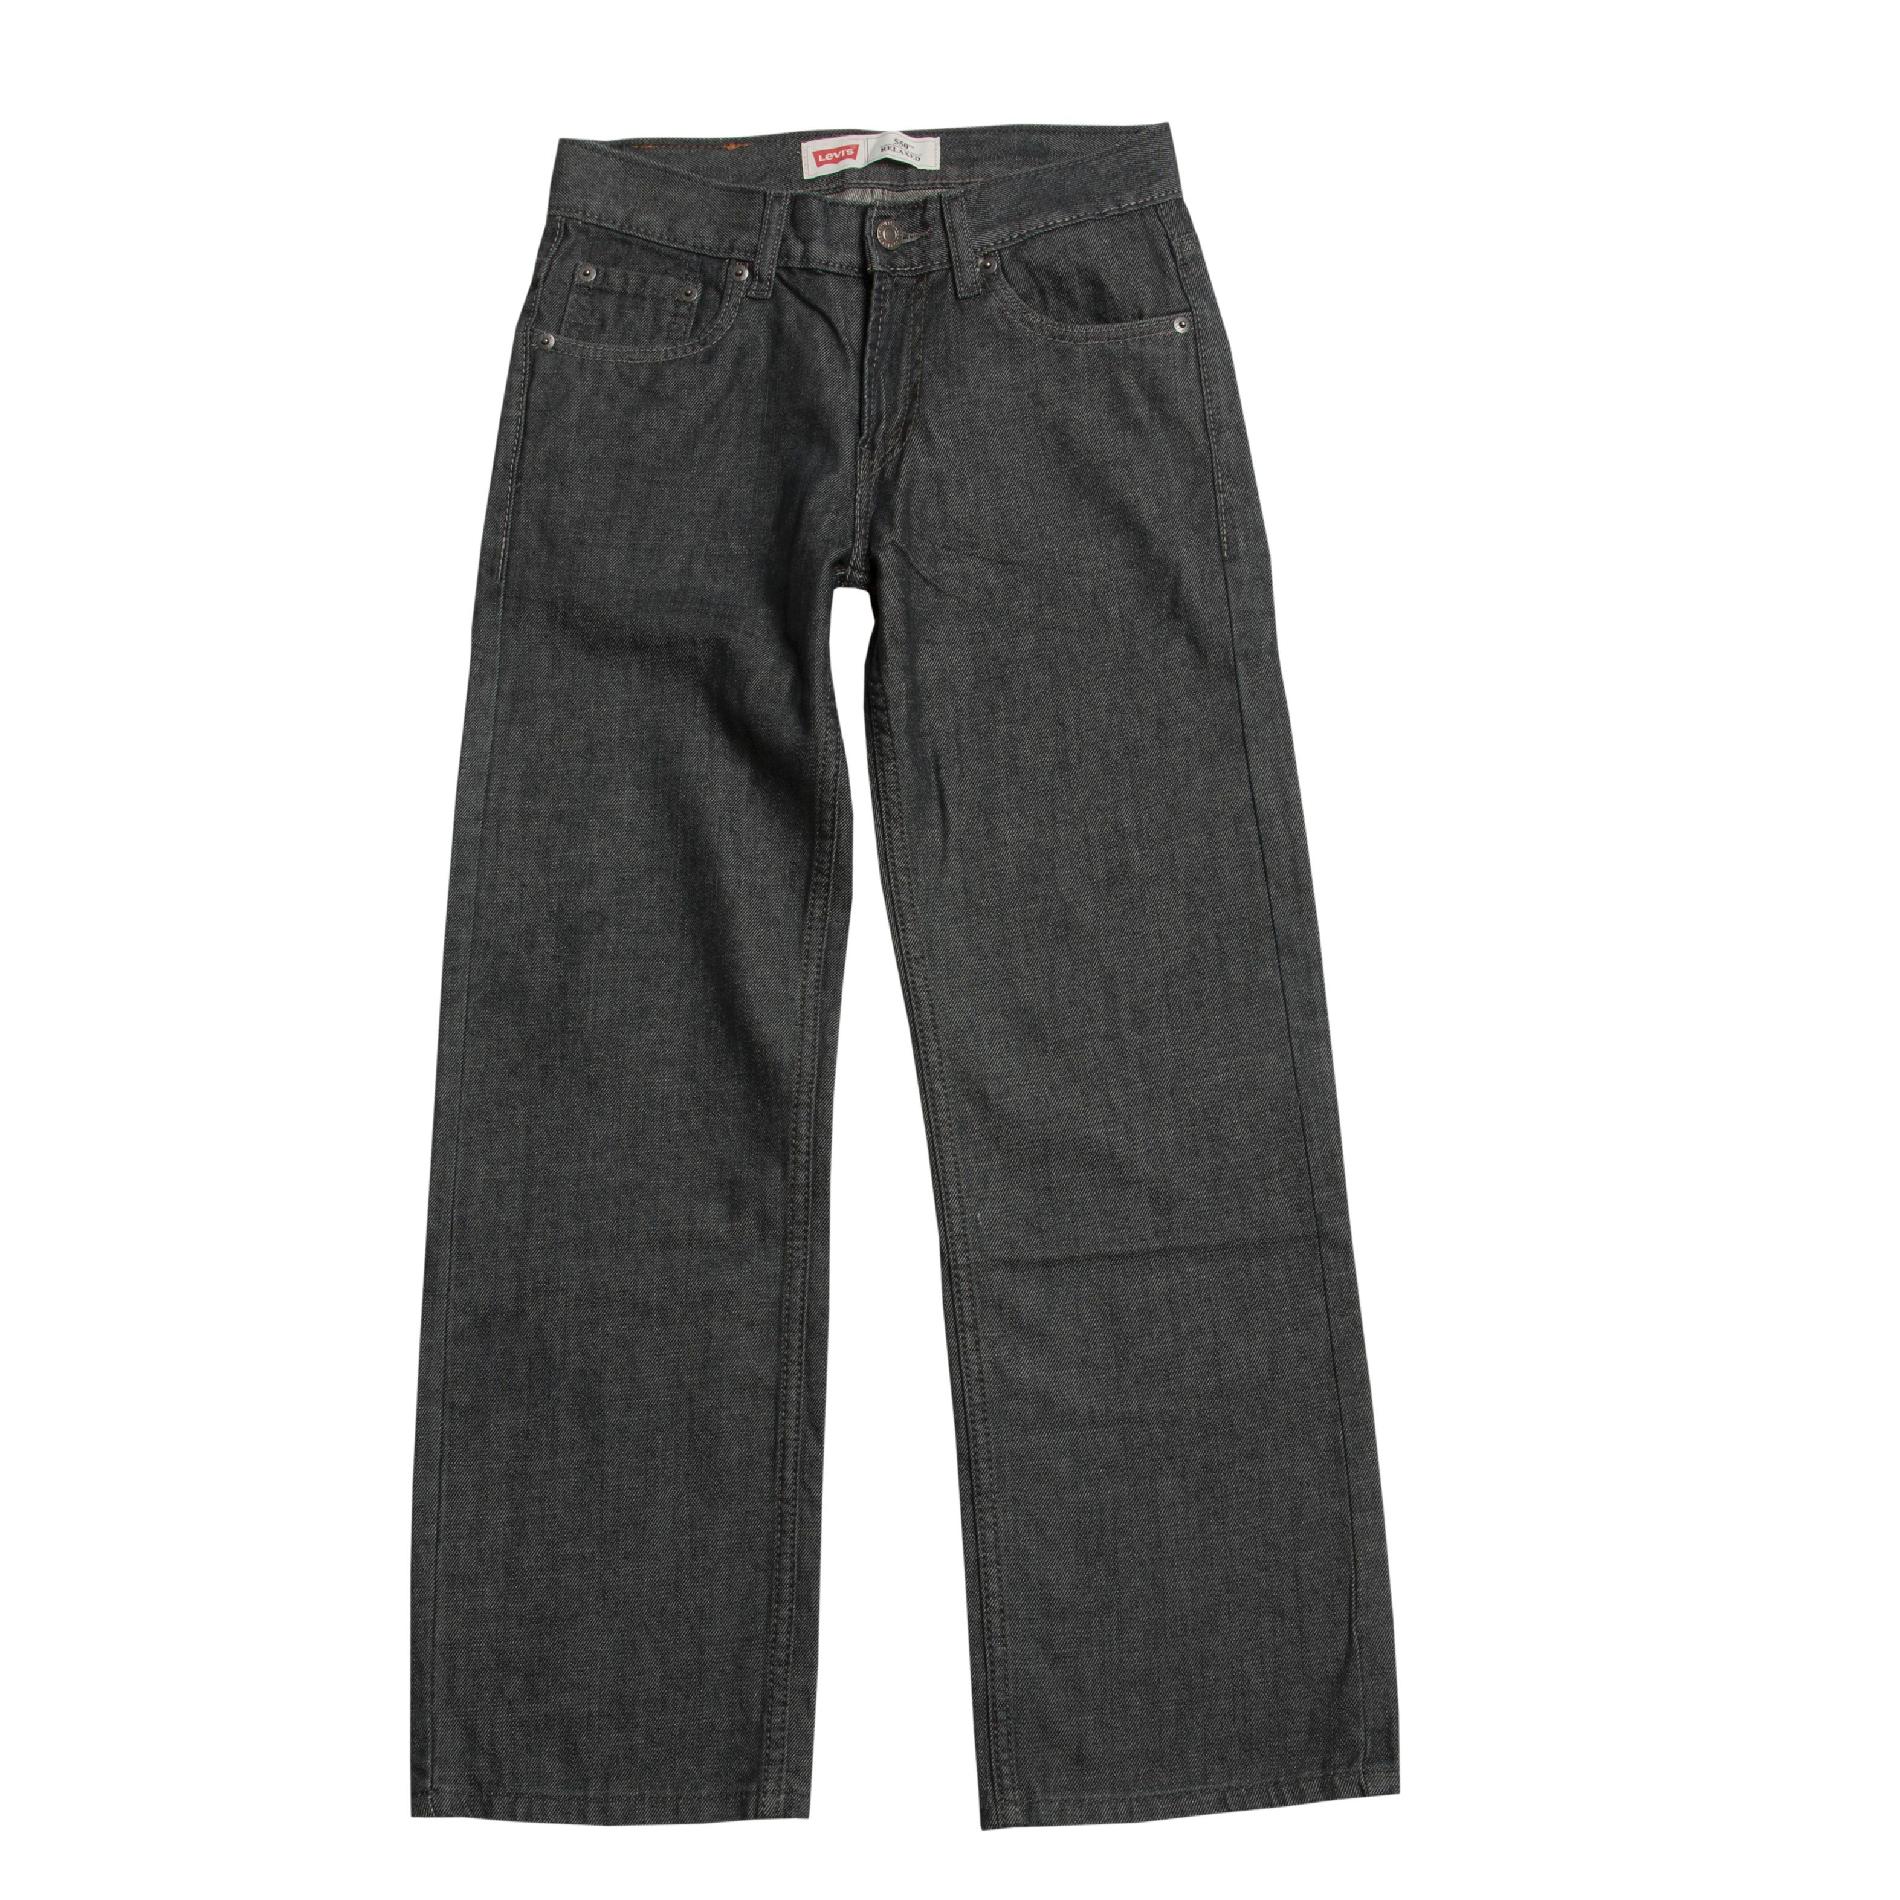 Levi's 550 Relaxed Fit Jeans: Take It Easy with Casual Styles at Sears